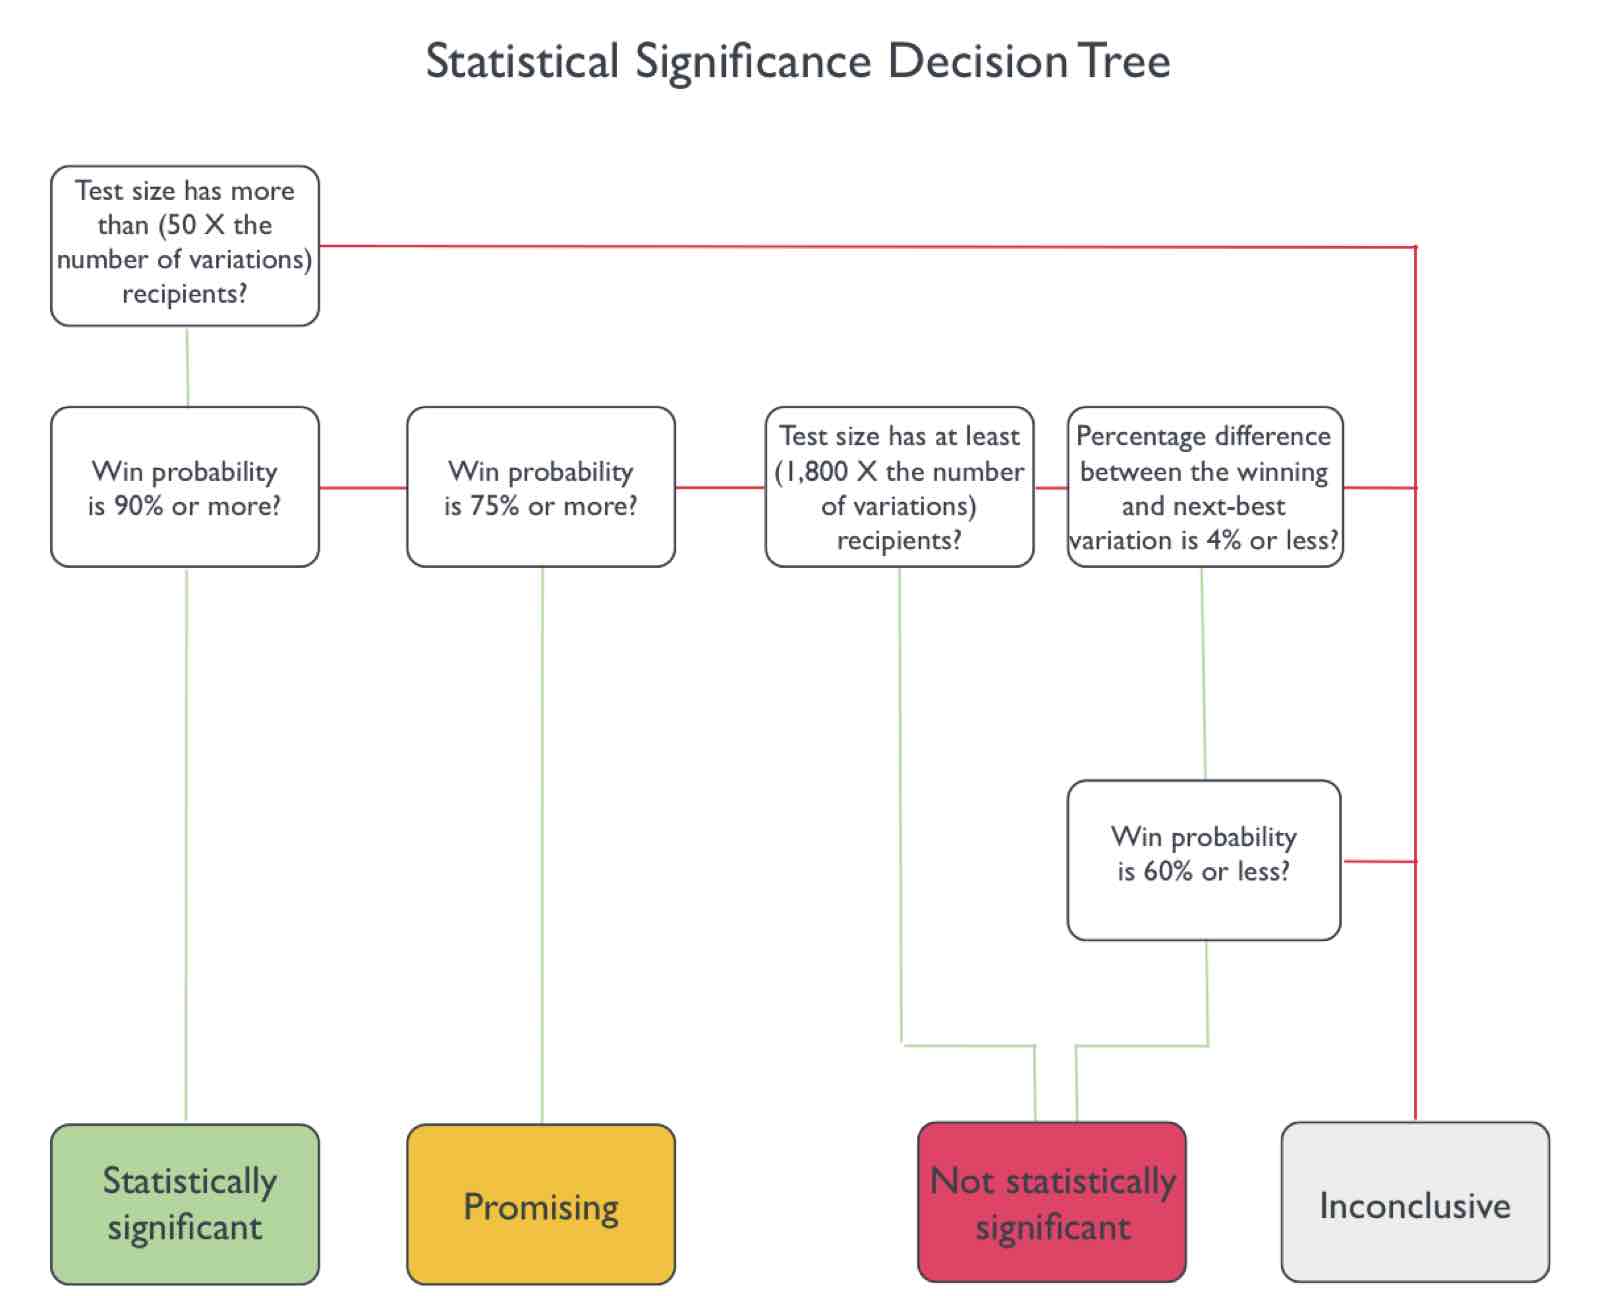 A decision tree outlining possible A/B test outcomes